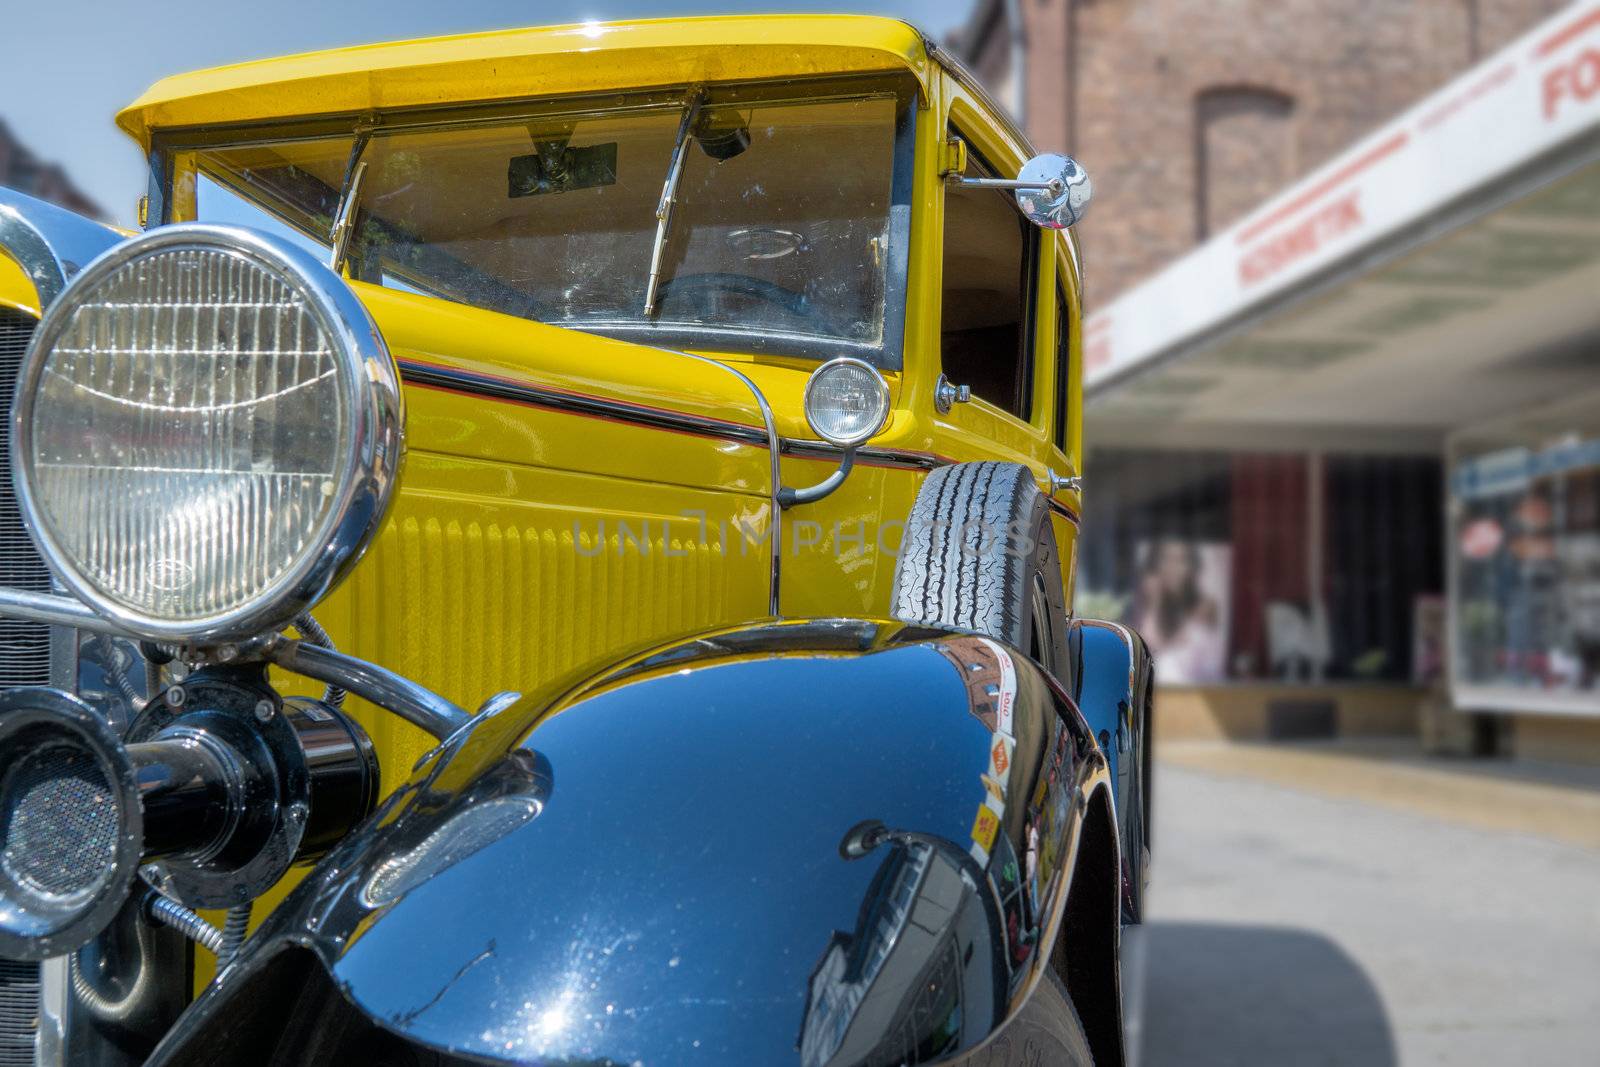 Wolfsburg, Lower Saxony, Germany, May 26., 2018: Yellow historic car in close-up view diagonally from the front, with black fenders, side parts with ventilation slots and small windscreen wipers by geogif